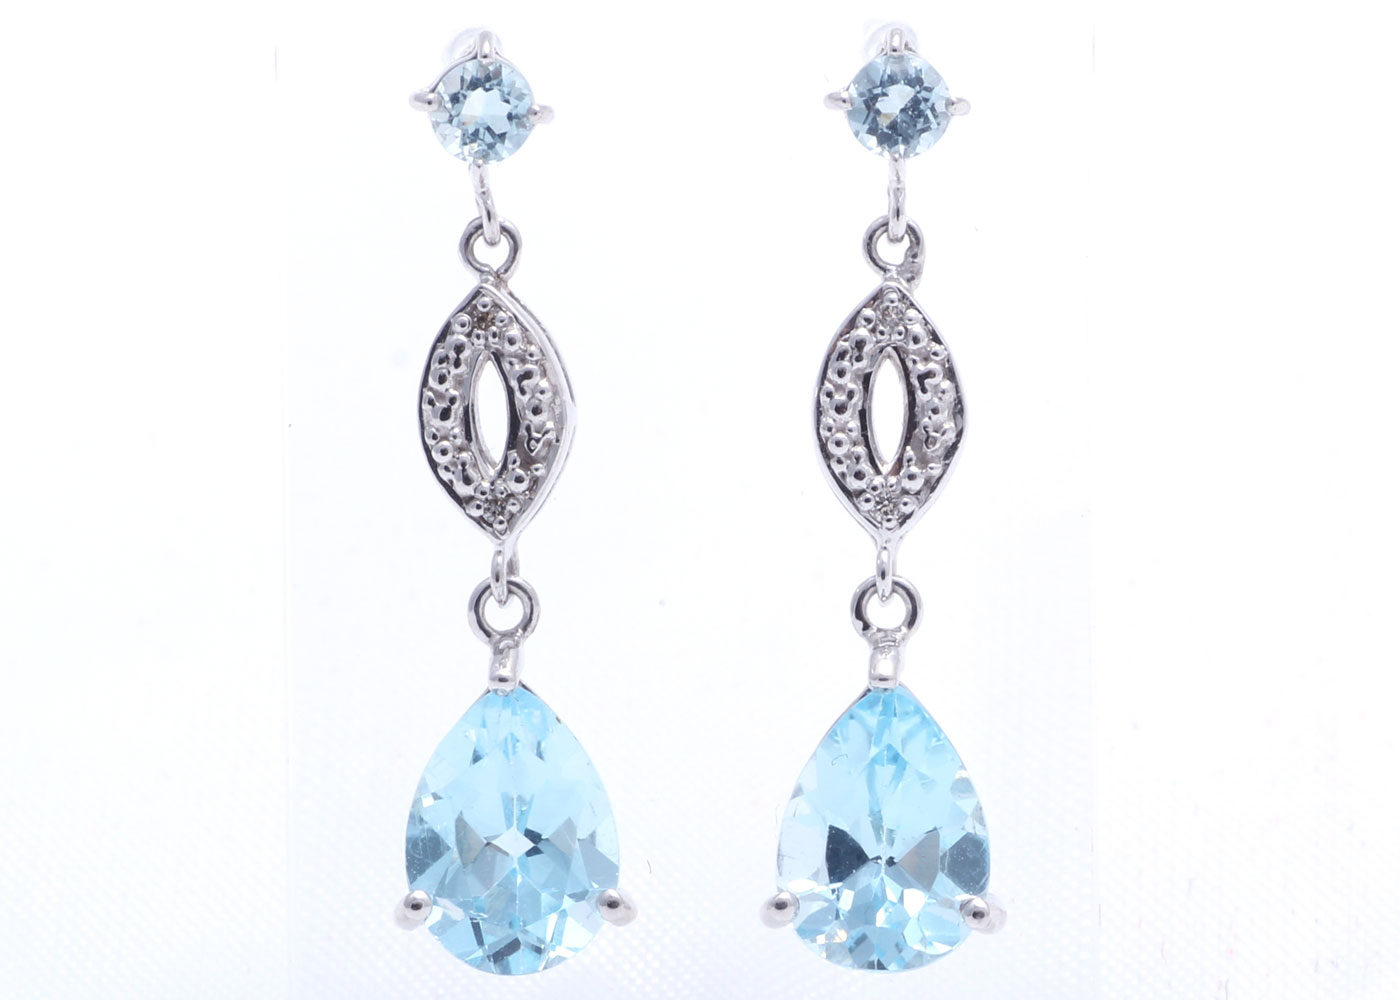 9ct White Gold Diamond And Blue Topaz Earring 0.02 Carats